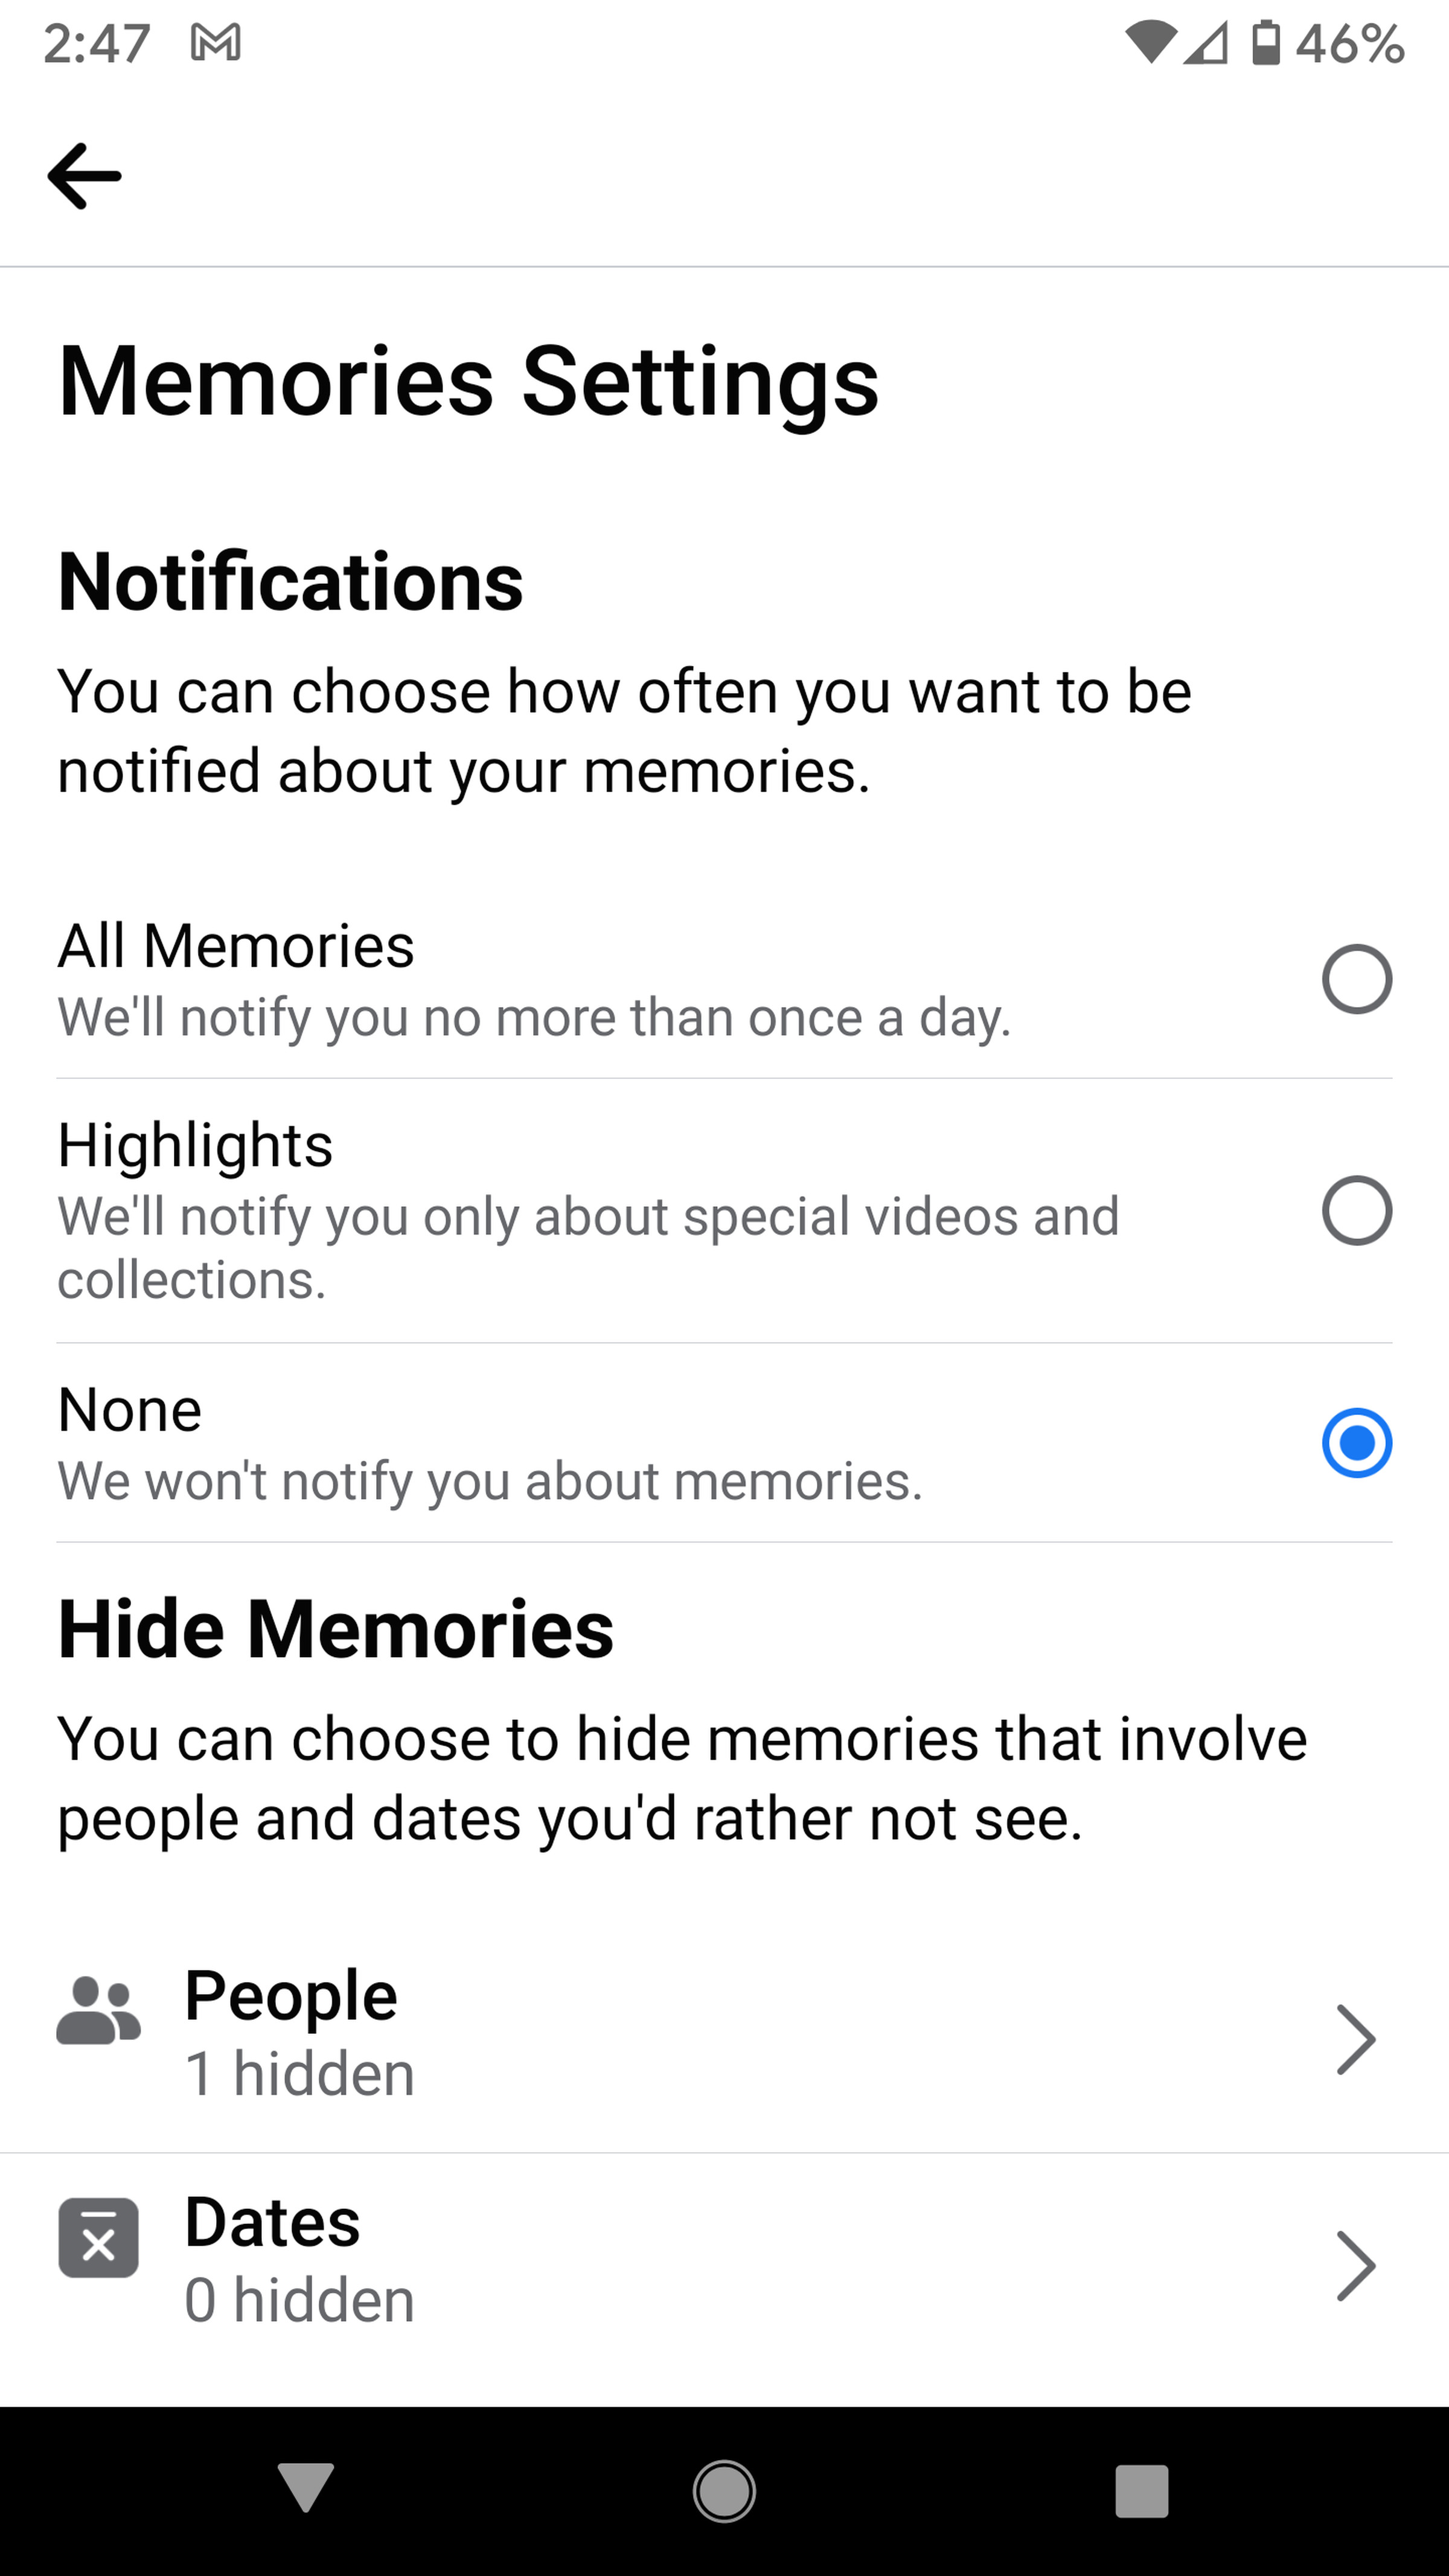 Besides hiding people or dates, you can choose how often to be notified about Memories.